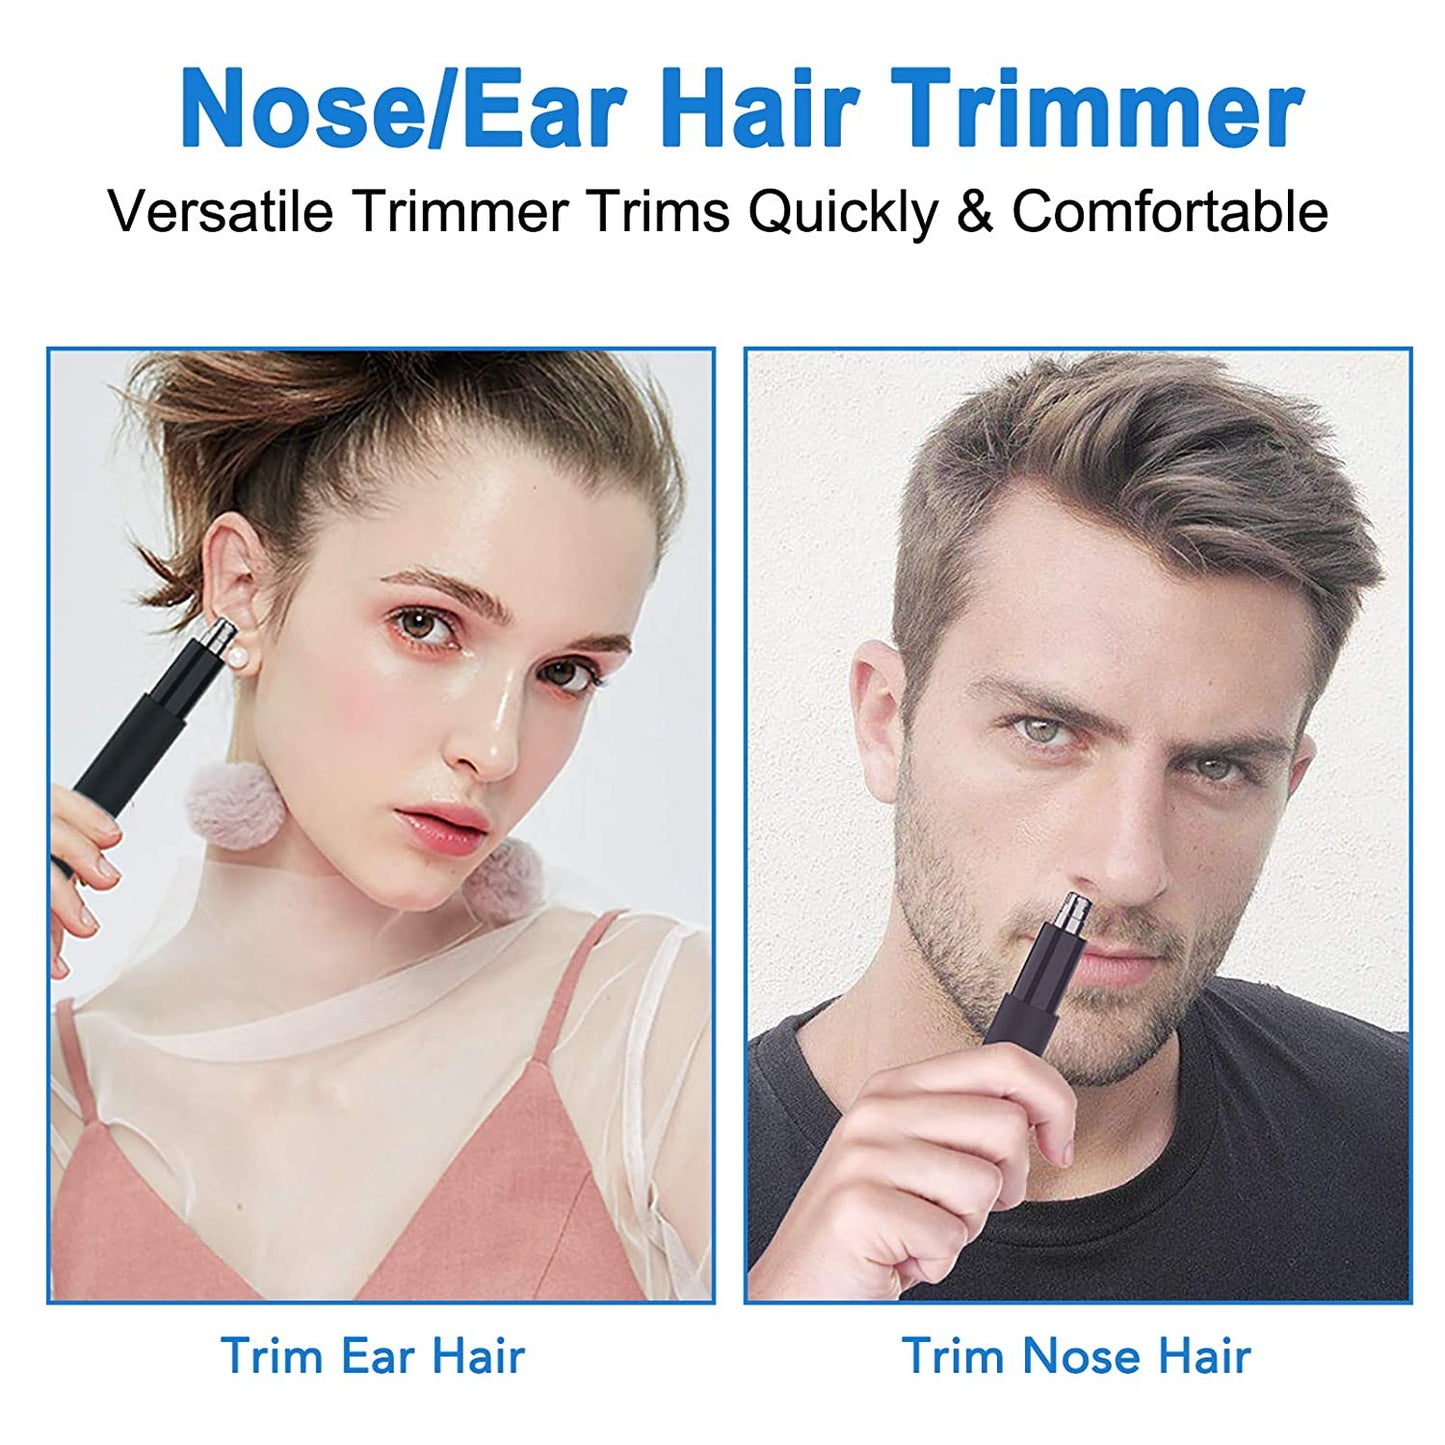 Ear and Nose Hair Tmmer for Men and Women